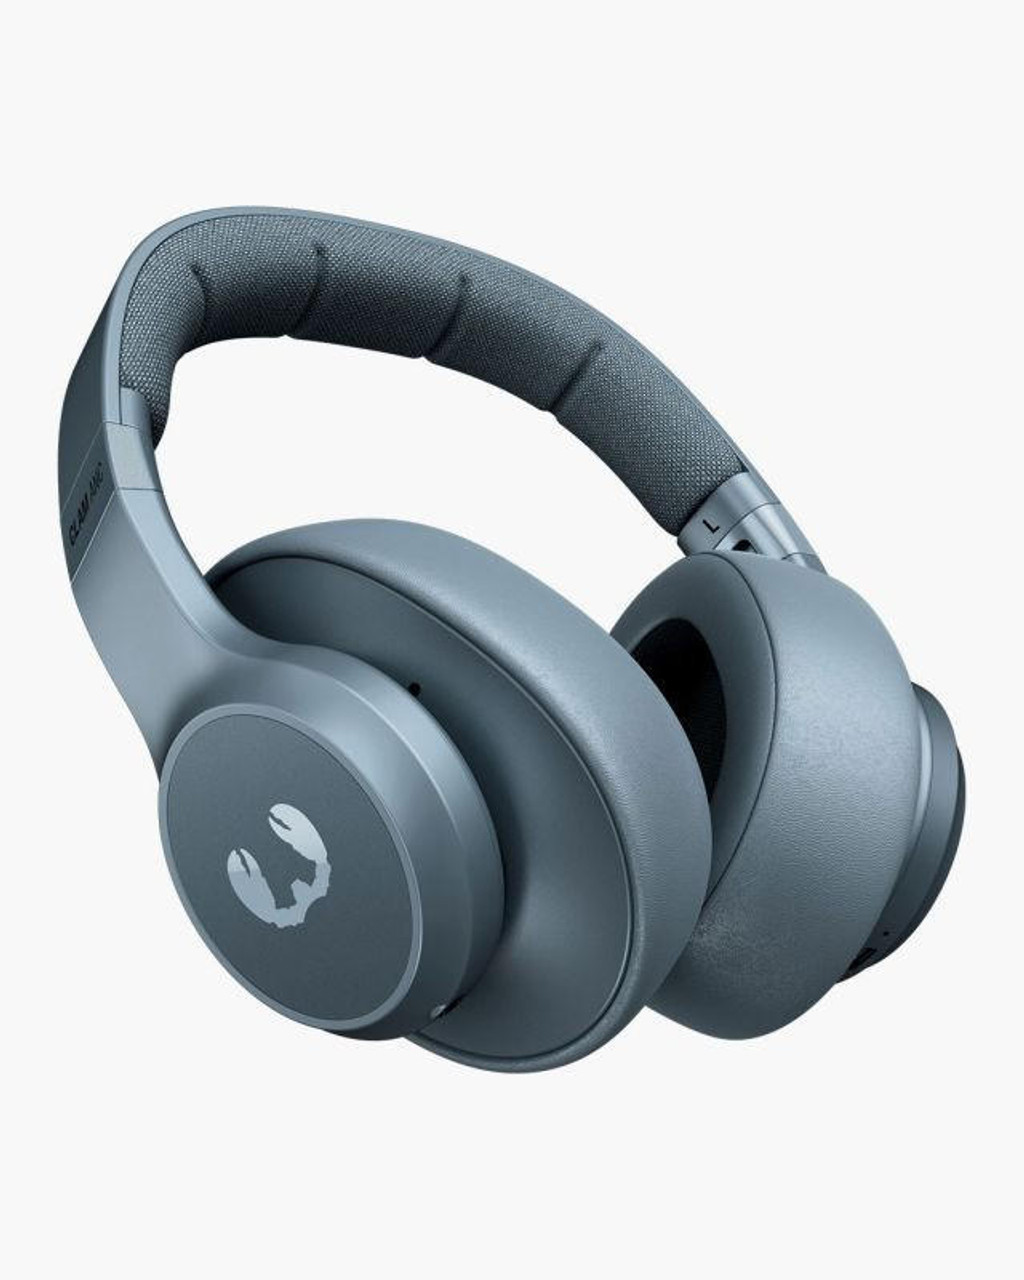 Clam 2 ANC | with Blue noise over-ear cancelling | Wireless | active 3HP4102DV headphones Dive